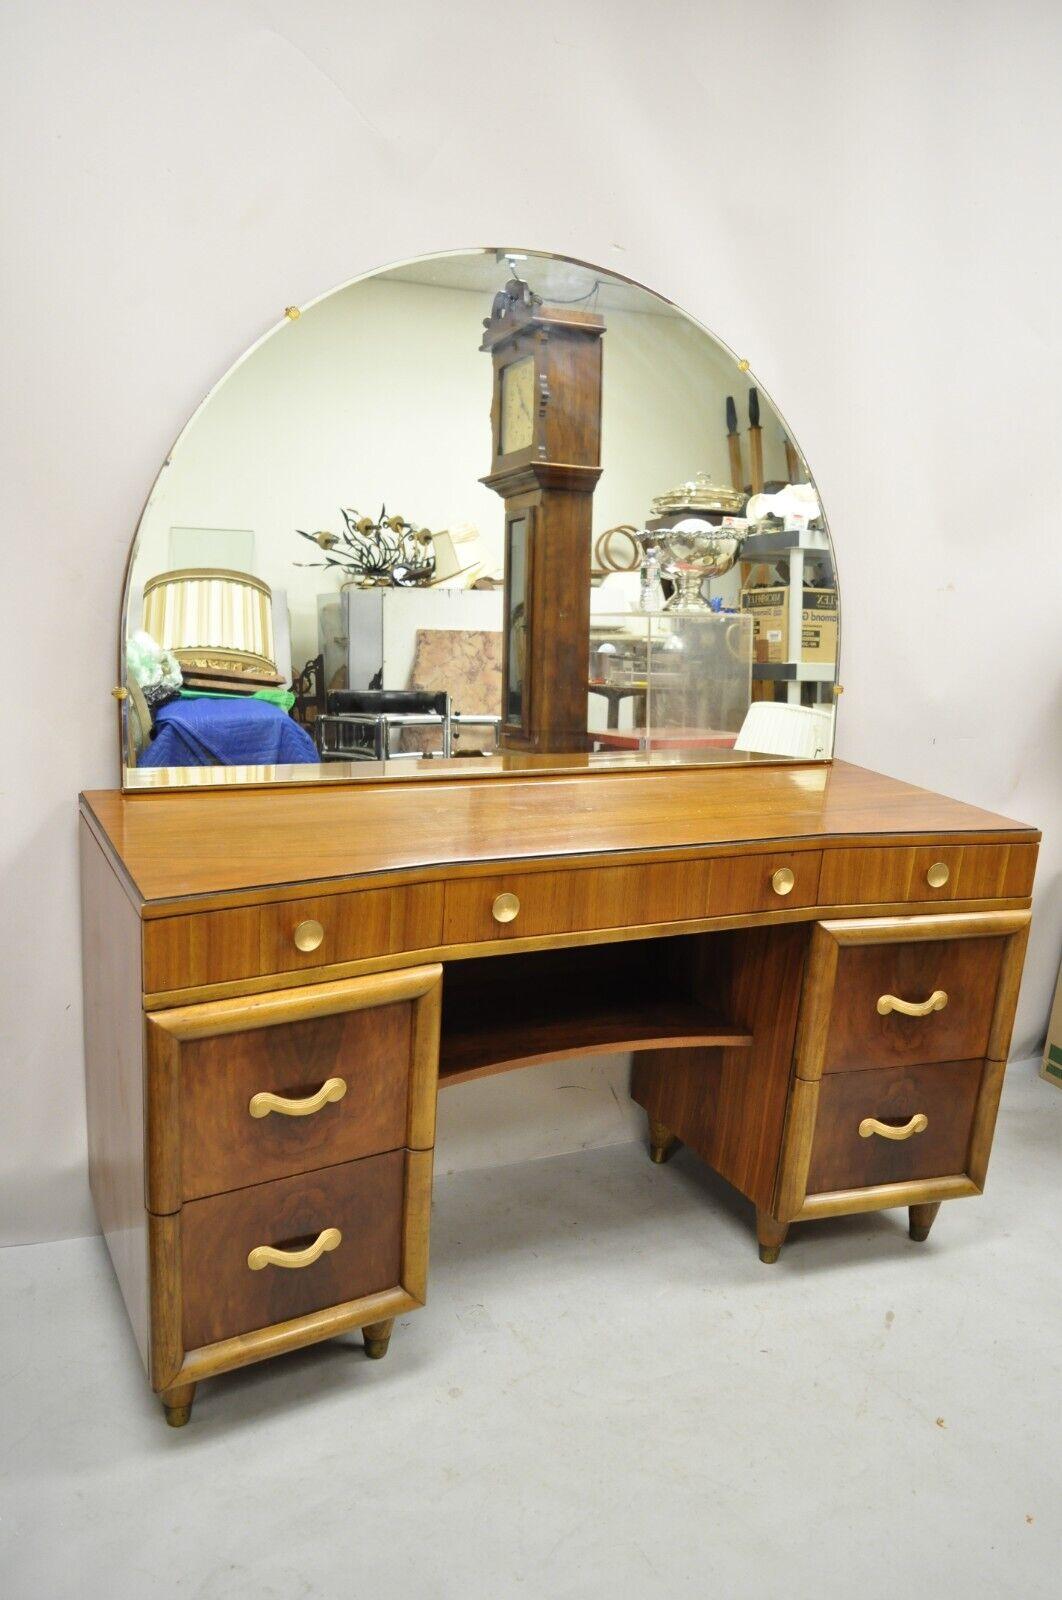 Joerns Bros Art Deco Mid Century Burl Walnut Vanity Table with Mirror. Item features arched modernist mirror, brass capped feet, black painted trim, bowed front, 7 dovetailed drawers, tapered legs. Circa early to mid 20th century.
Measurements: